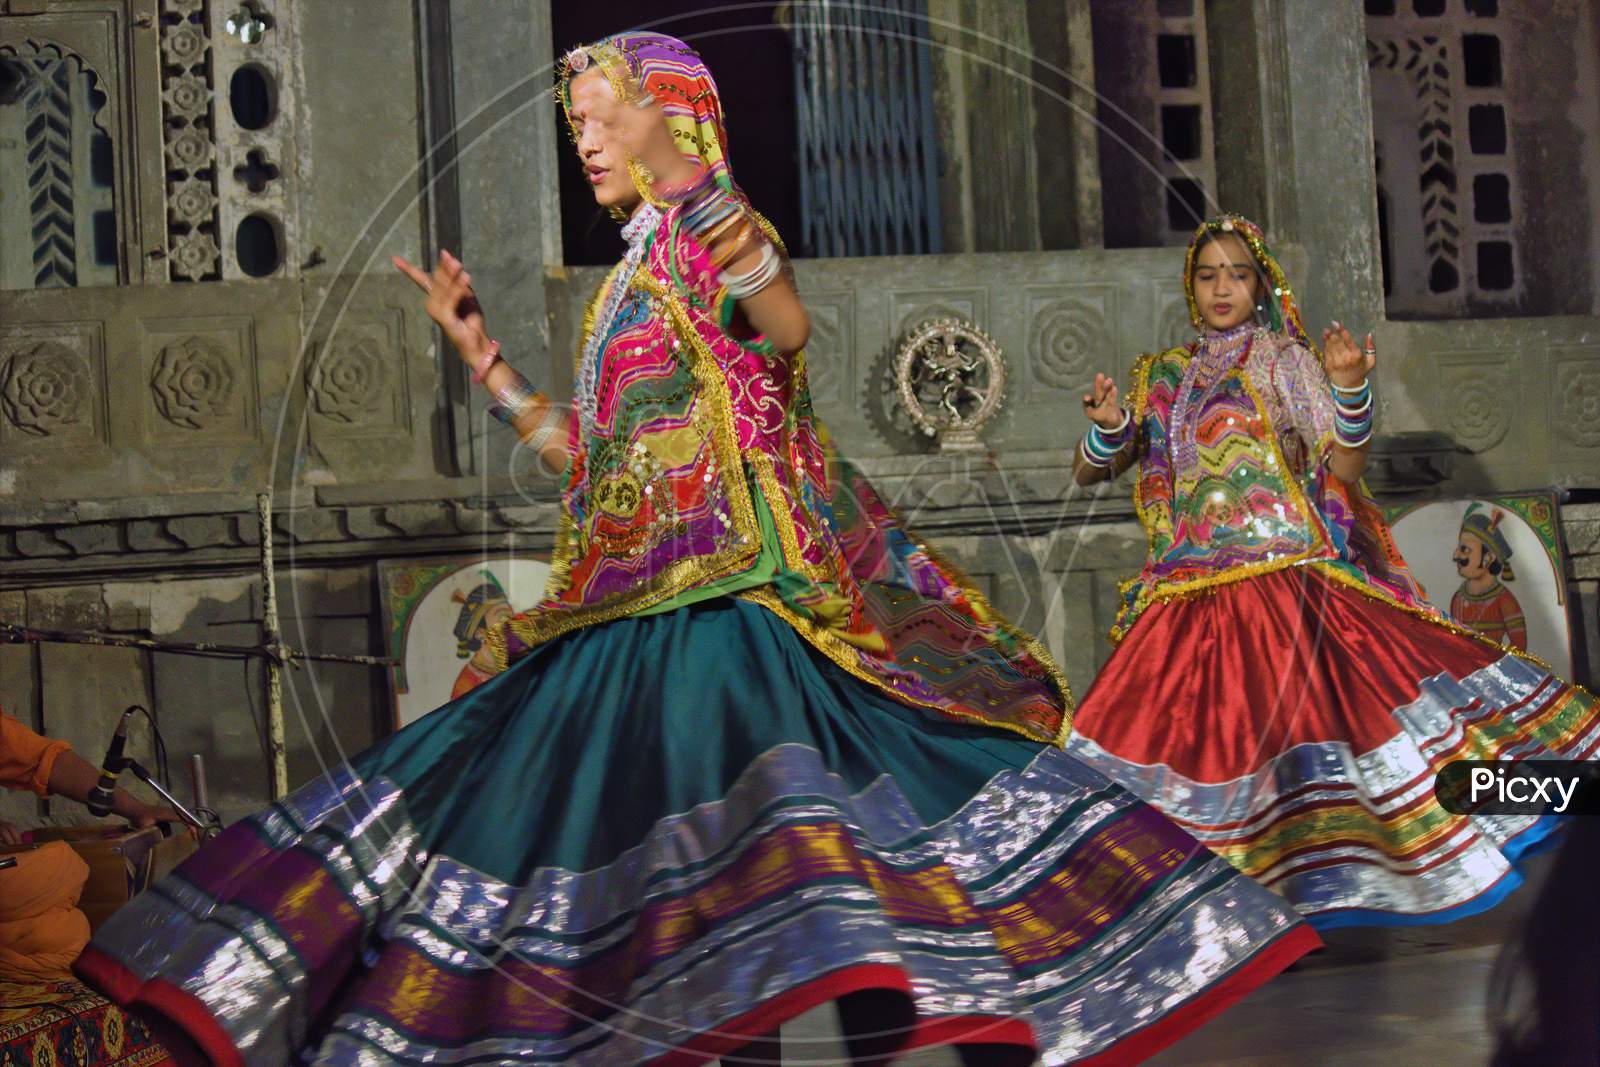 Udaipur, India - May 24, 2013: Two Indian Women Dancing In Rajasthan State Of India In Traditional Colorful Dress